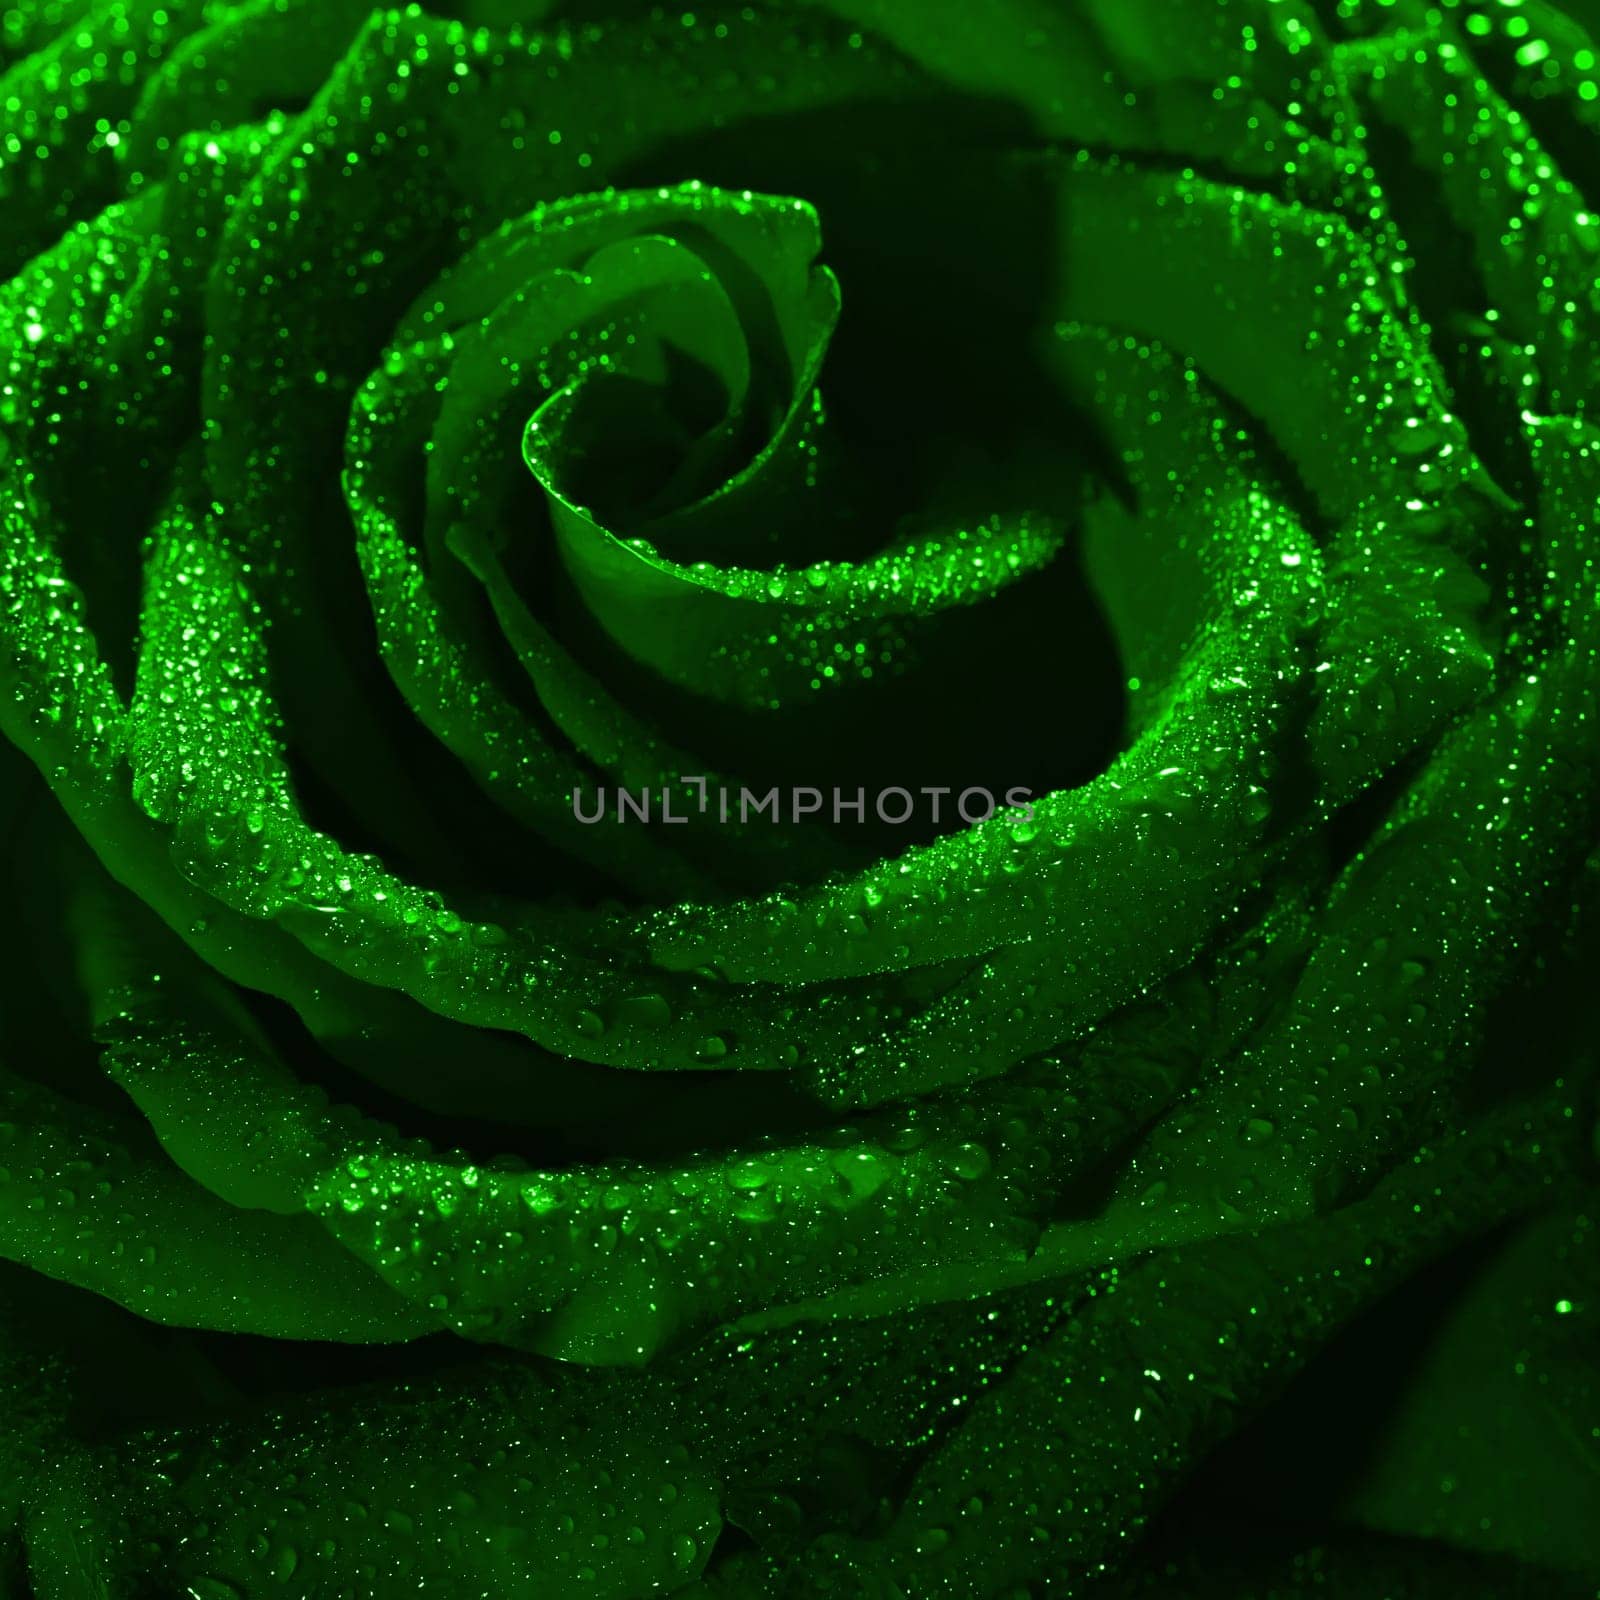 Blooming green rose bud in water drops close-up on a black background by glavbooh